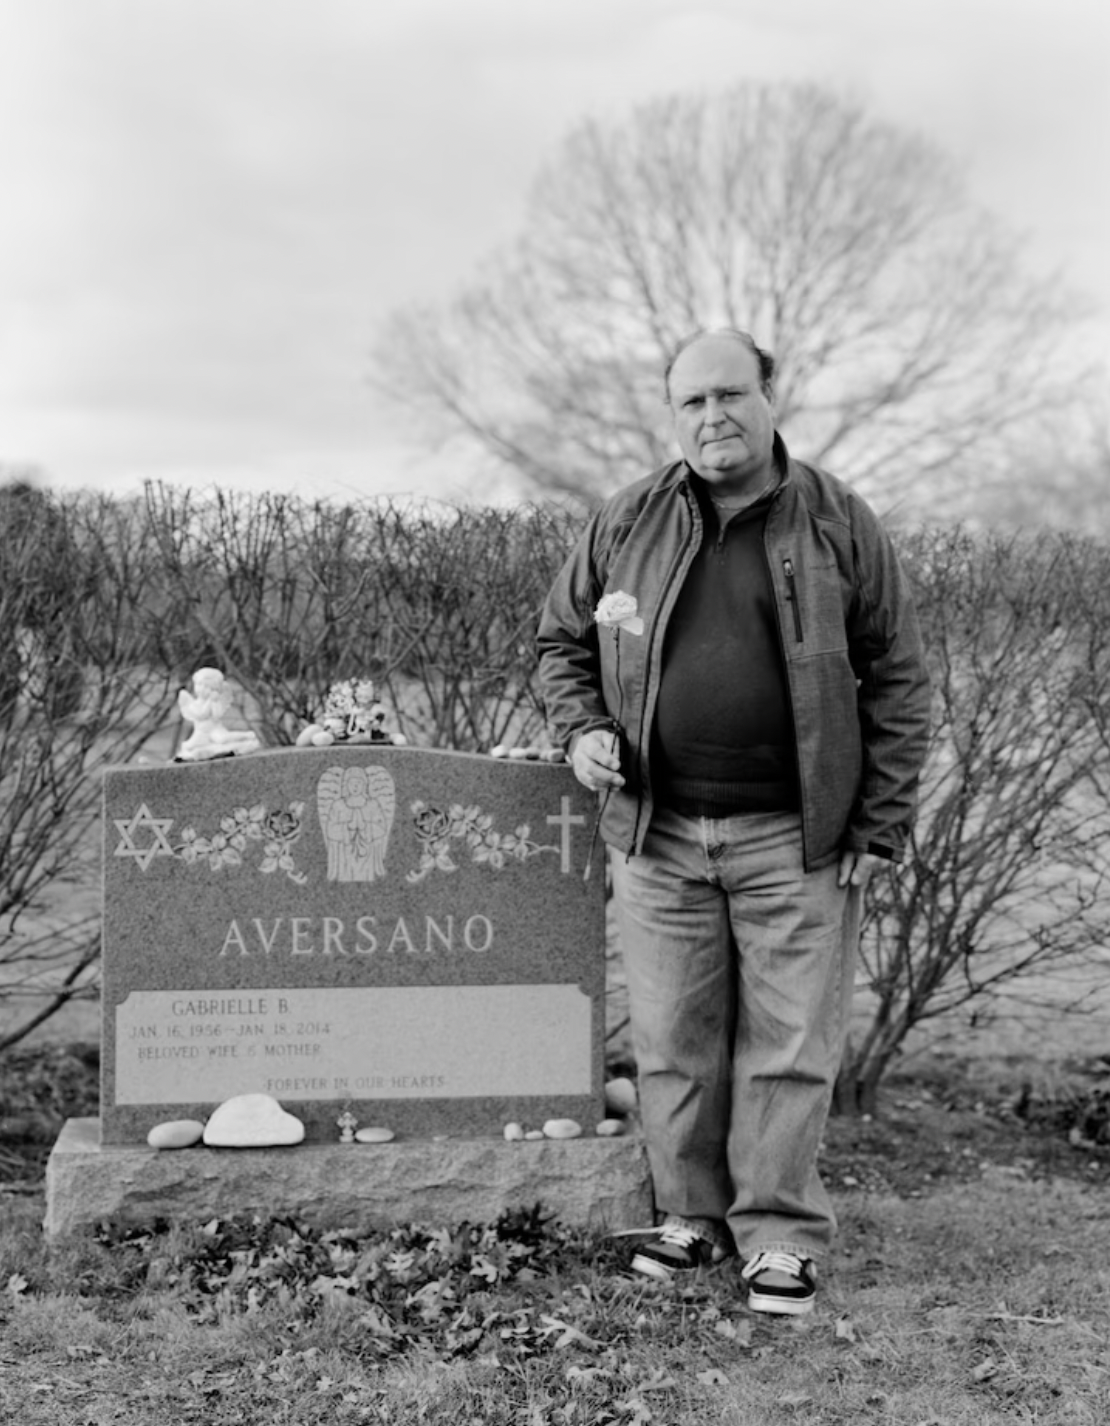 A black and white photograph of a man holding a flower standing next to the grave of his wife. There is an open space on the headstone where his name will be written when he died.